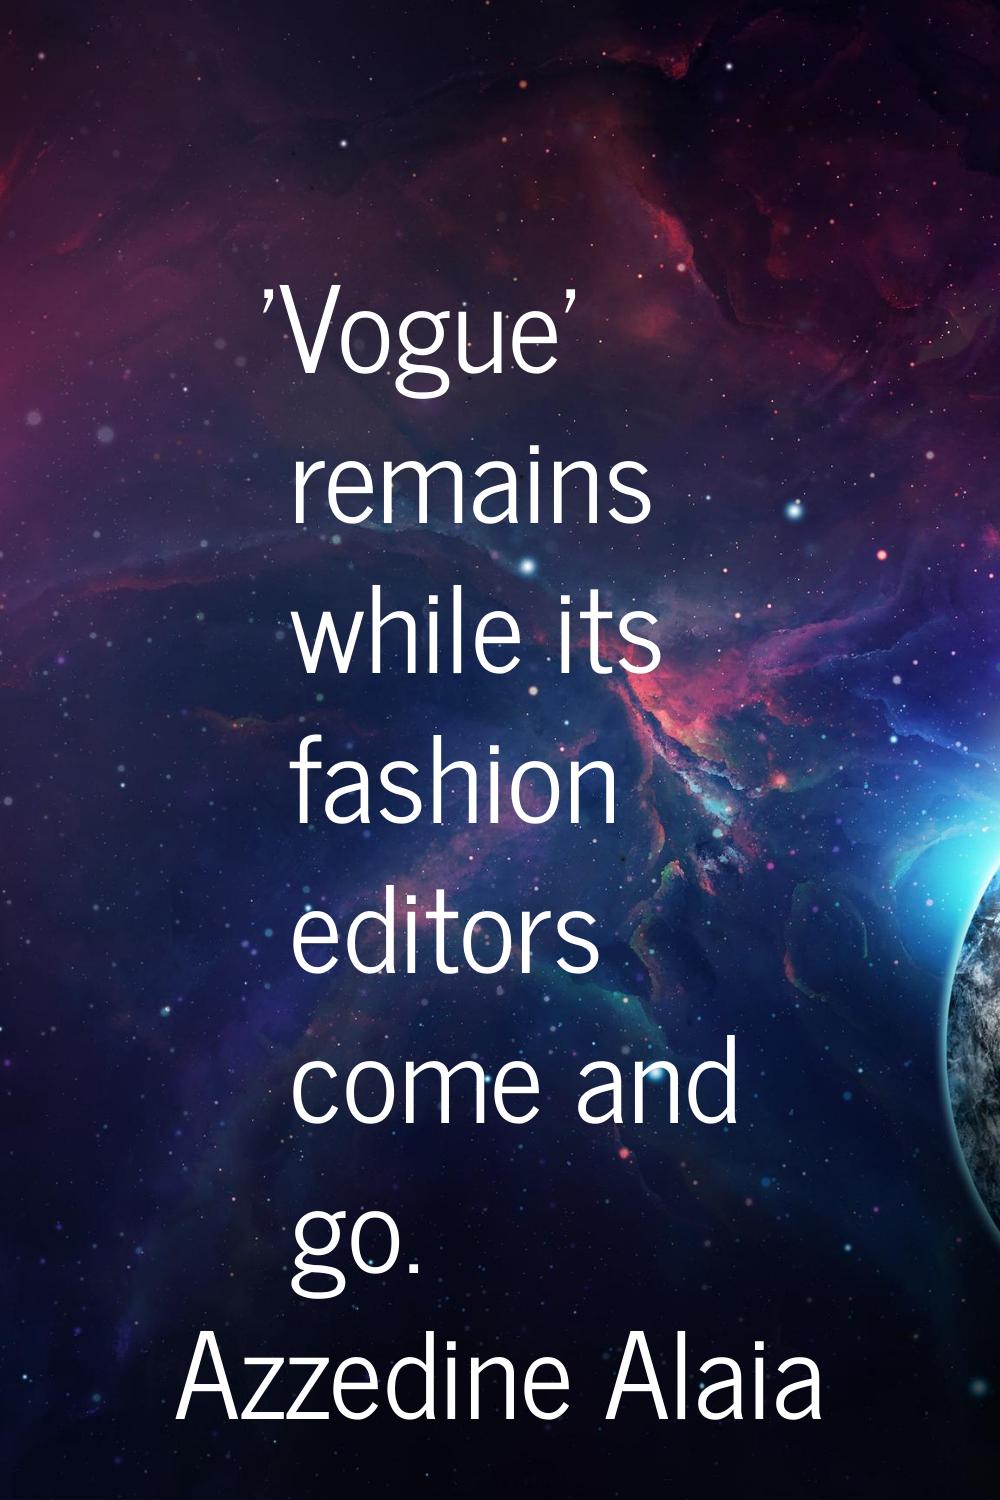 'Vogue' remains while its fashion editors come and go.